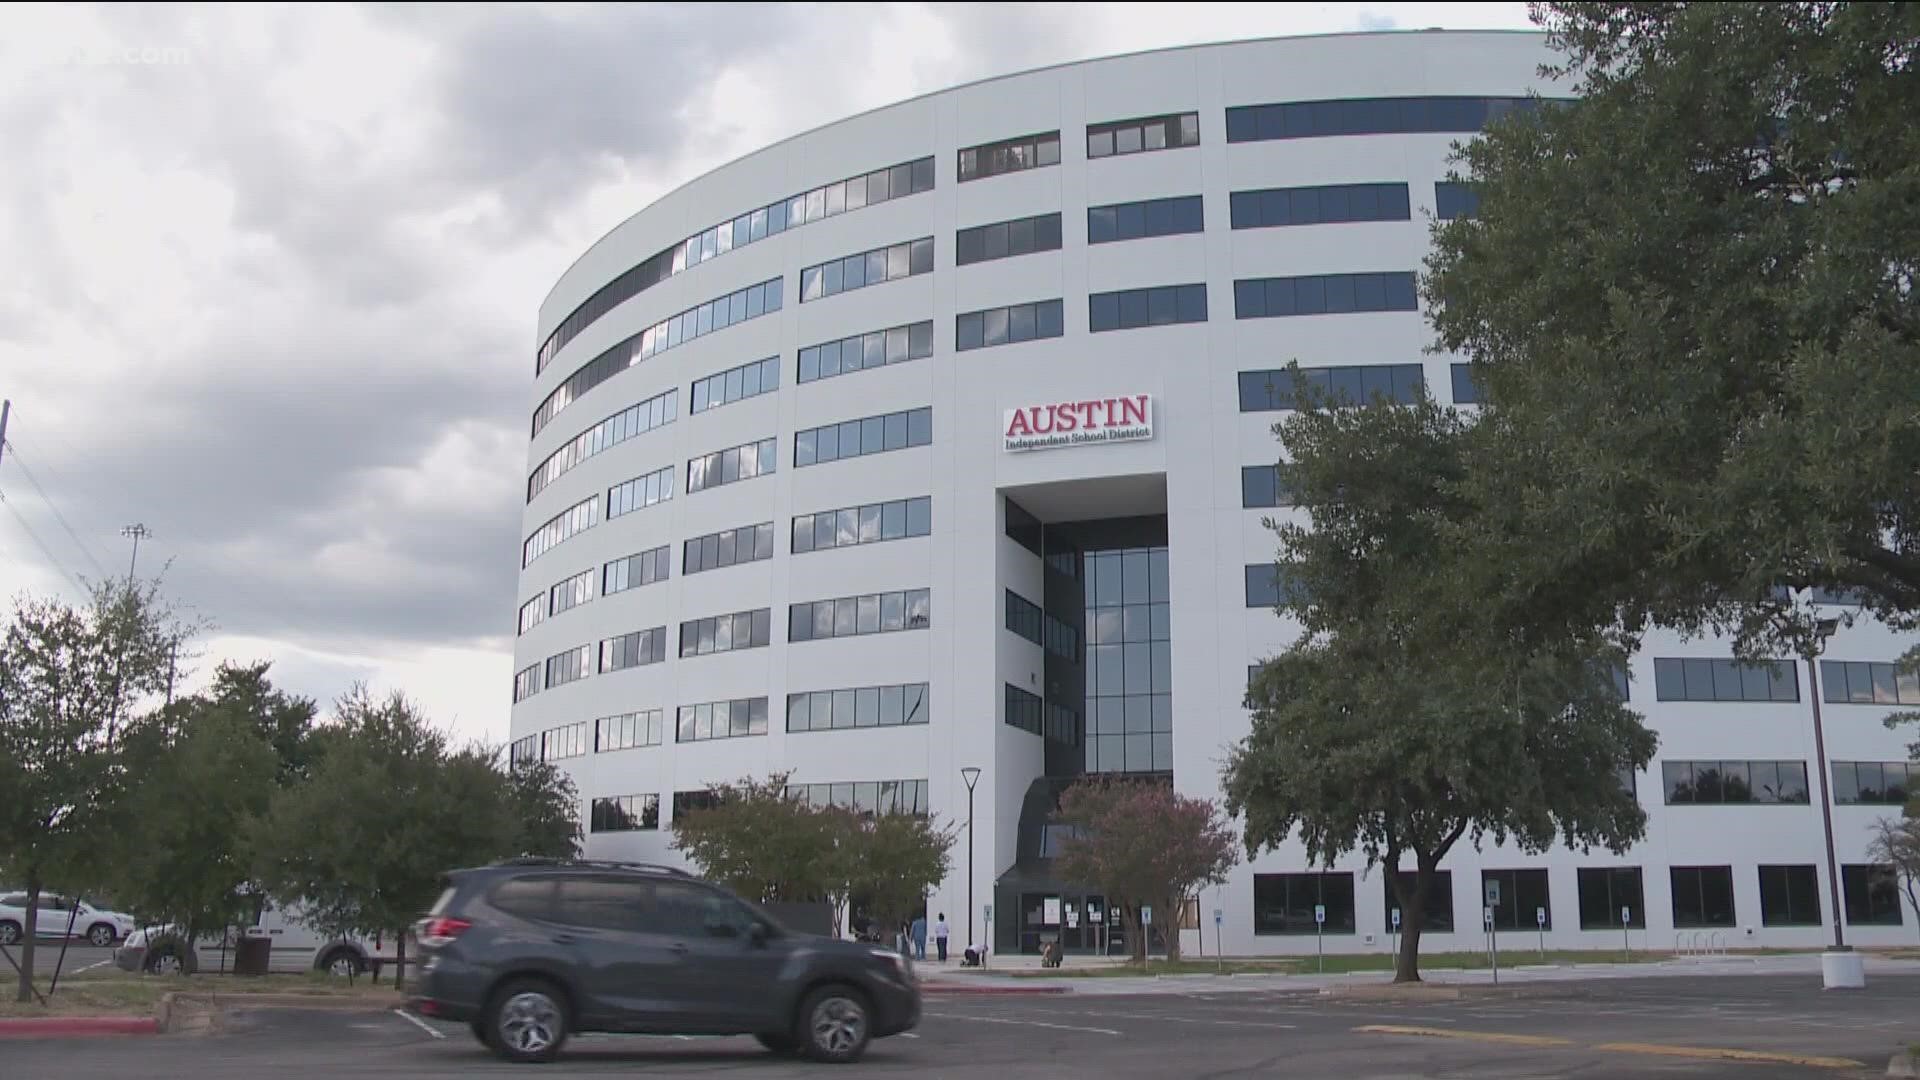 AISD said Friday the issue was fixed and that more than 1,200 employees affected should have their pay, but later said some may not see the funds until Monday.